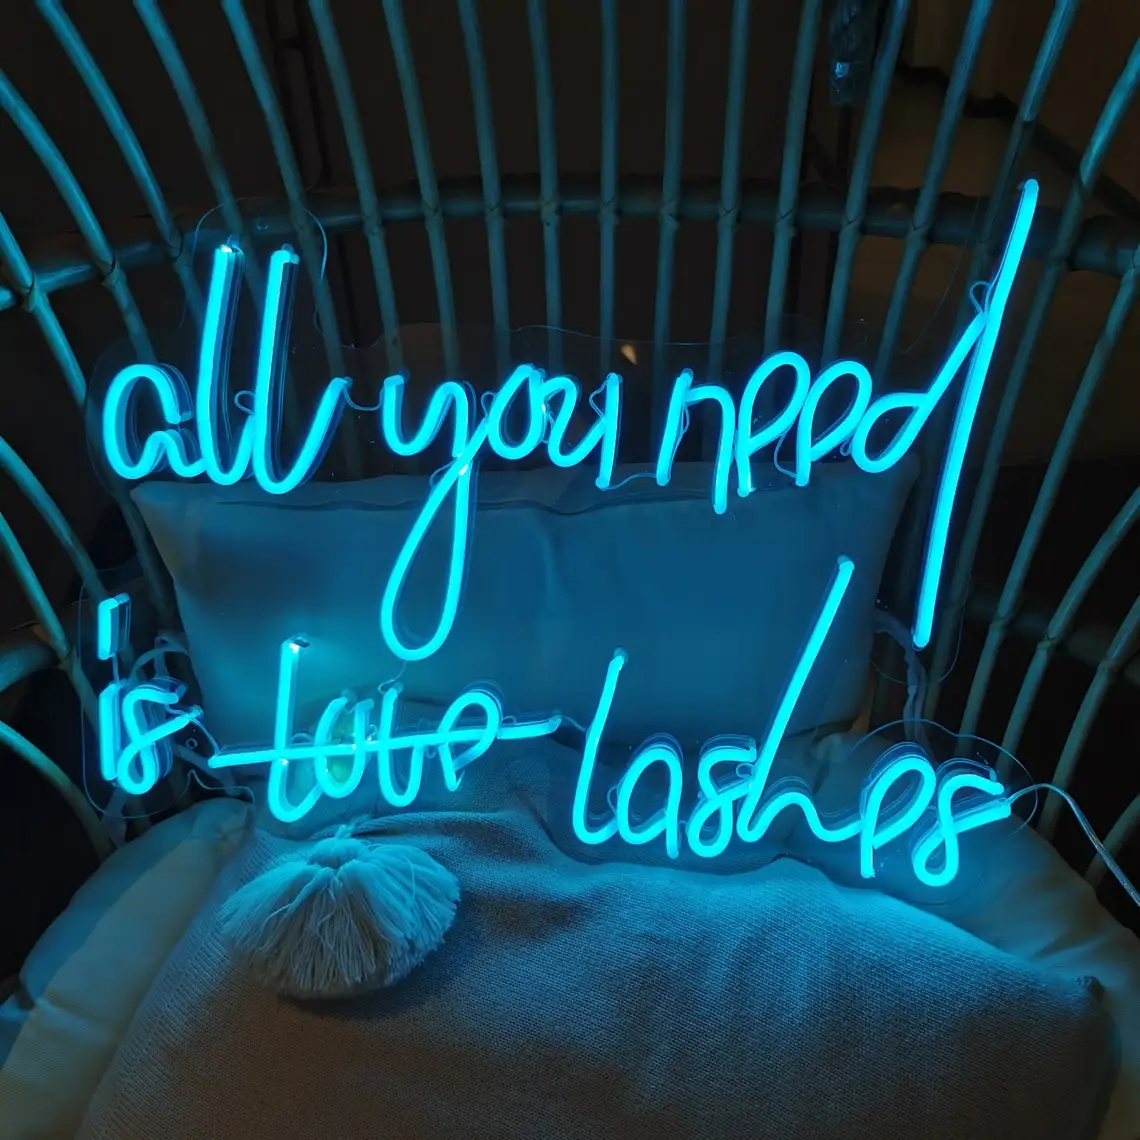 All You Need Is Love Lashes Custom Neon Sign Handmade Wedding Neon Sign Bridal Party Reception Decor Neon Lighting Wedding Gift